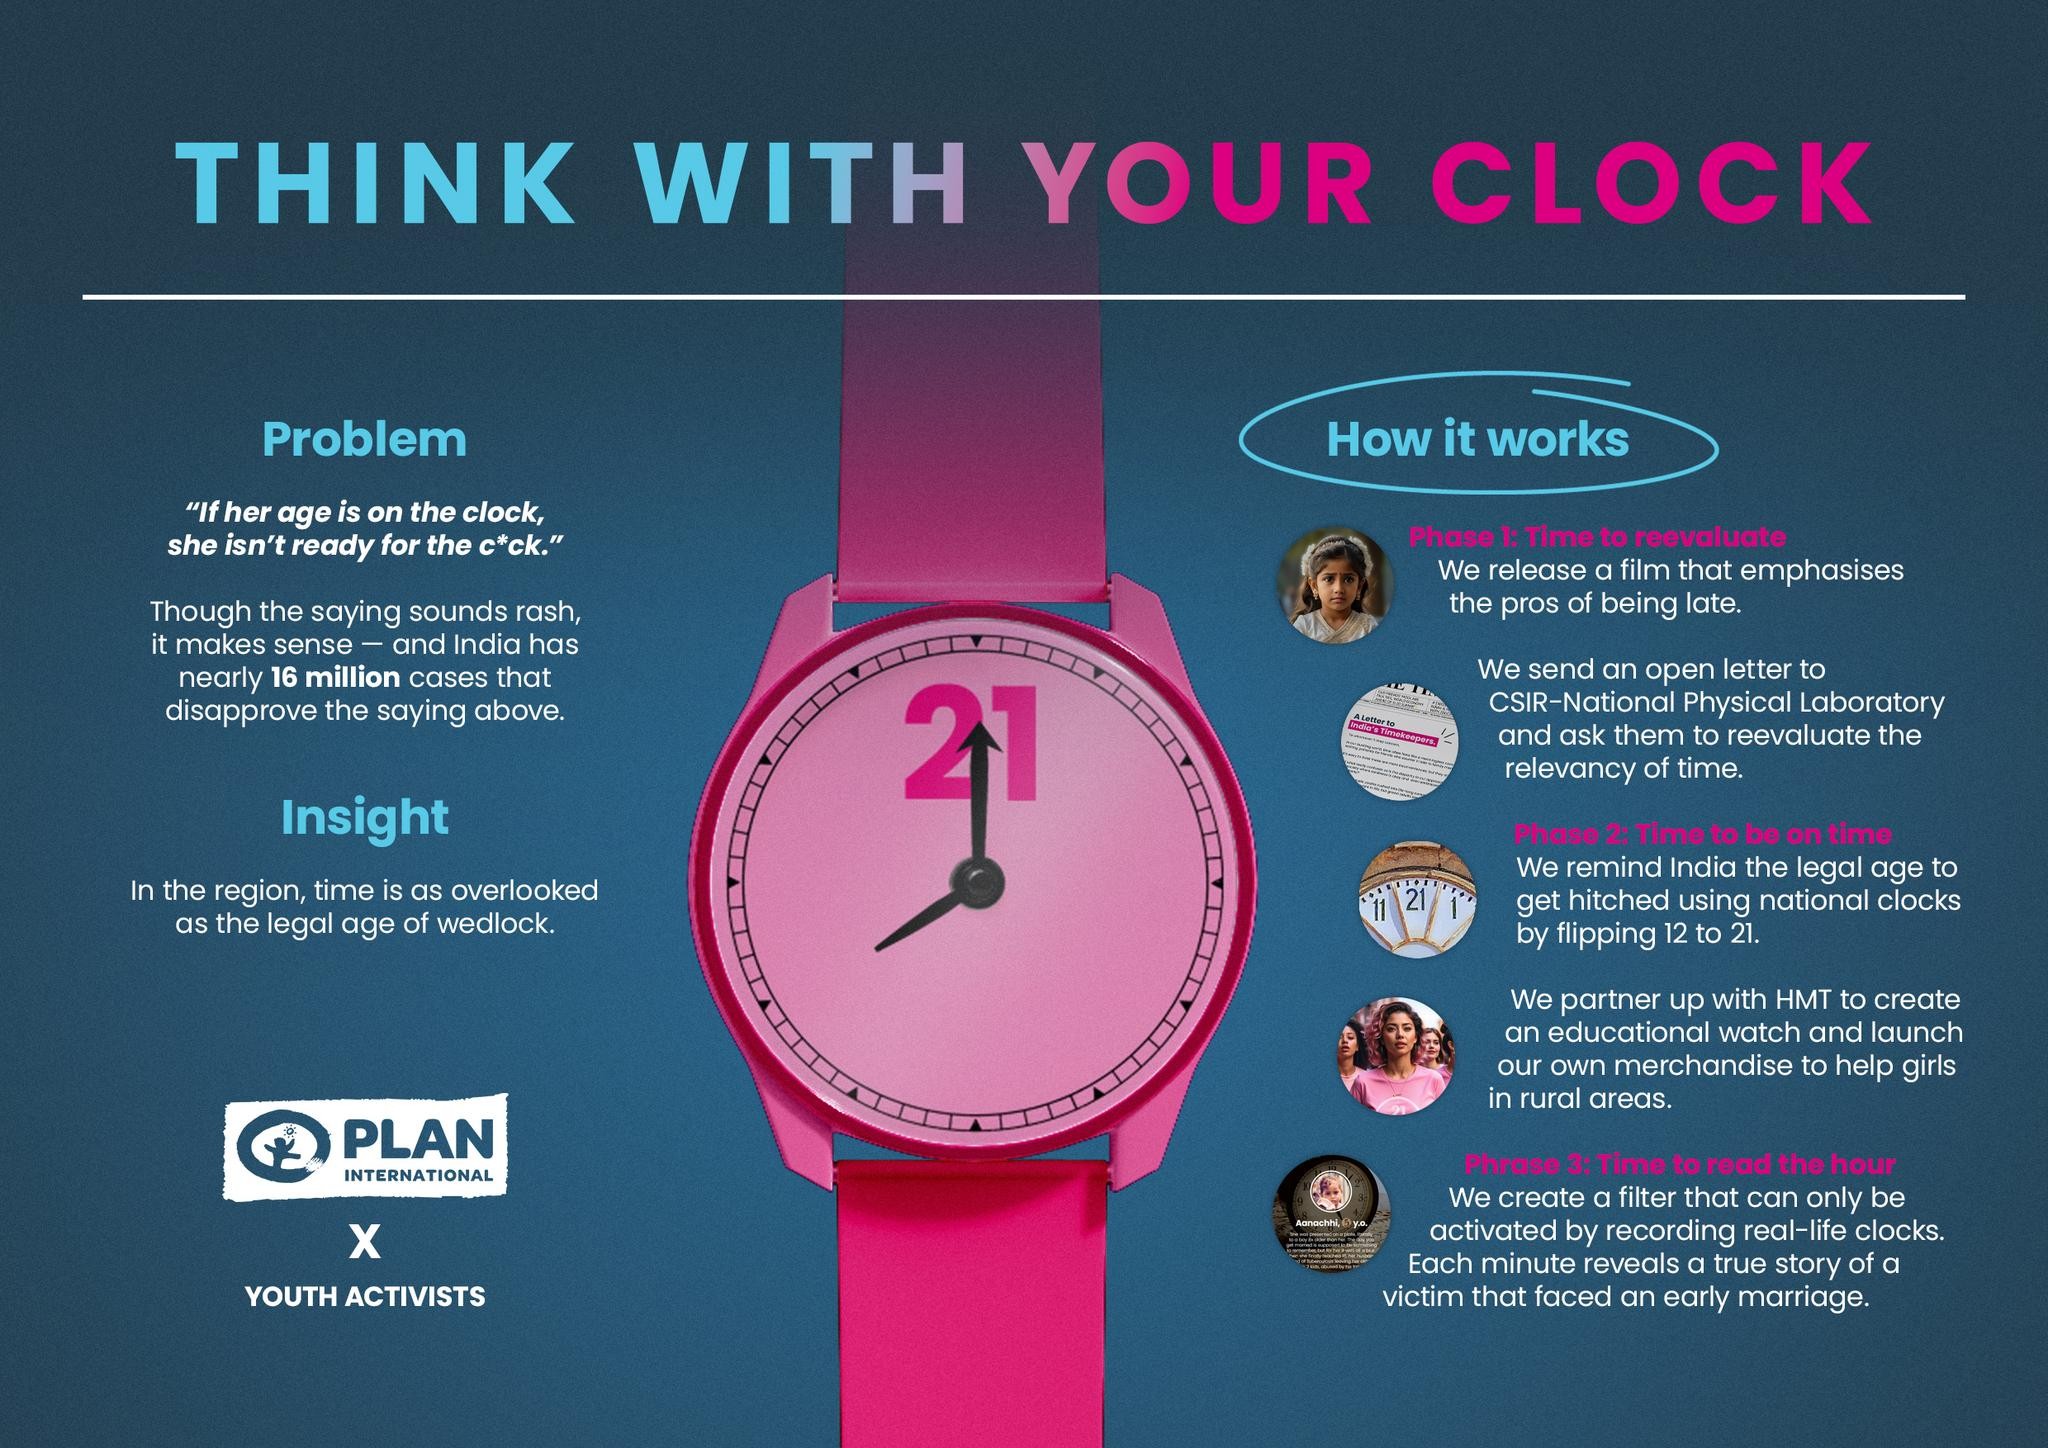 THINK WITH YOUR CLOCK